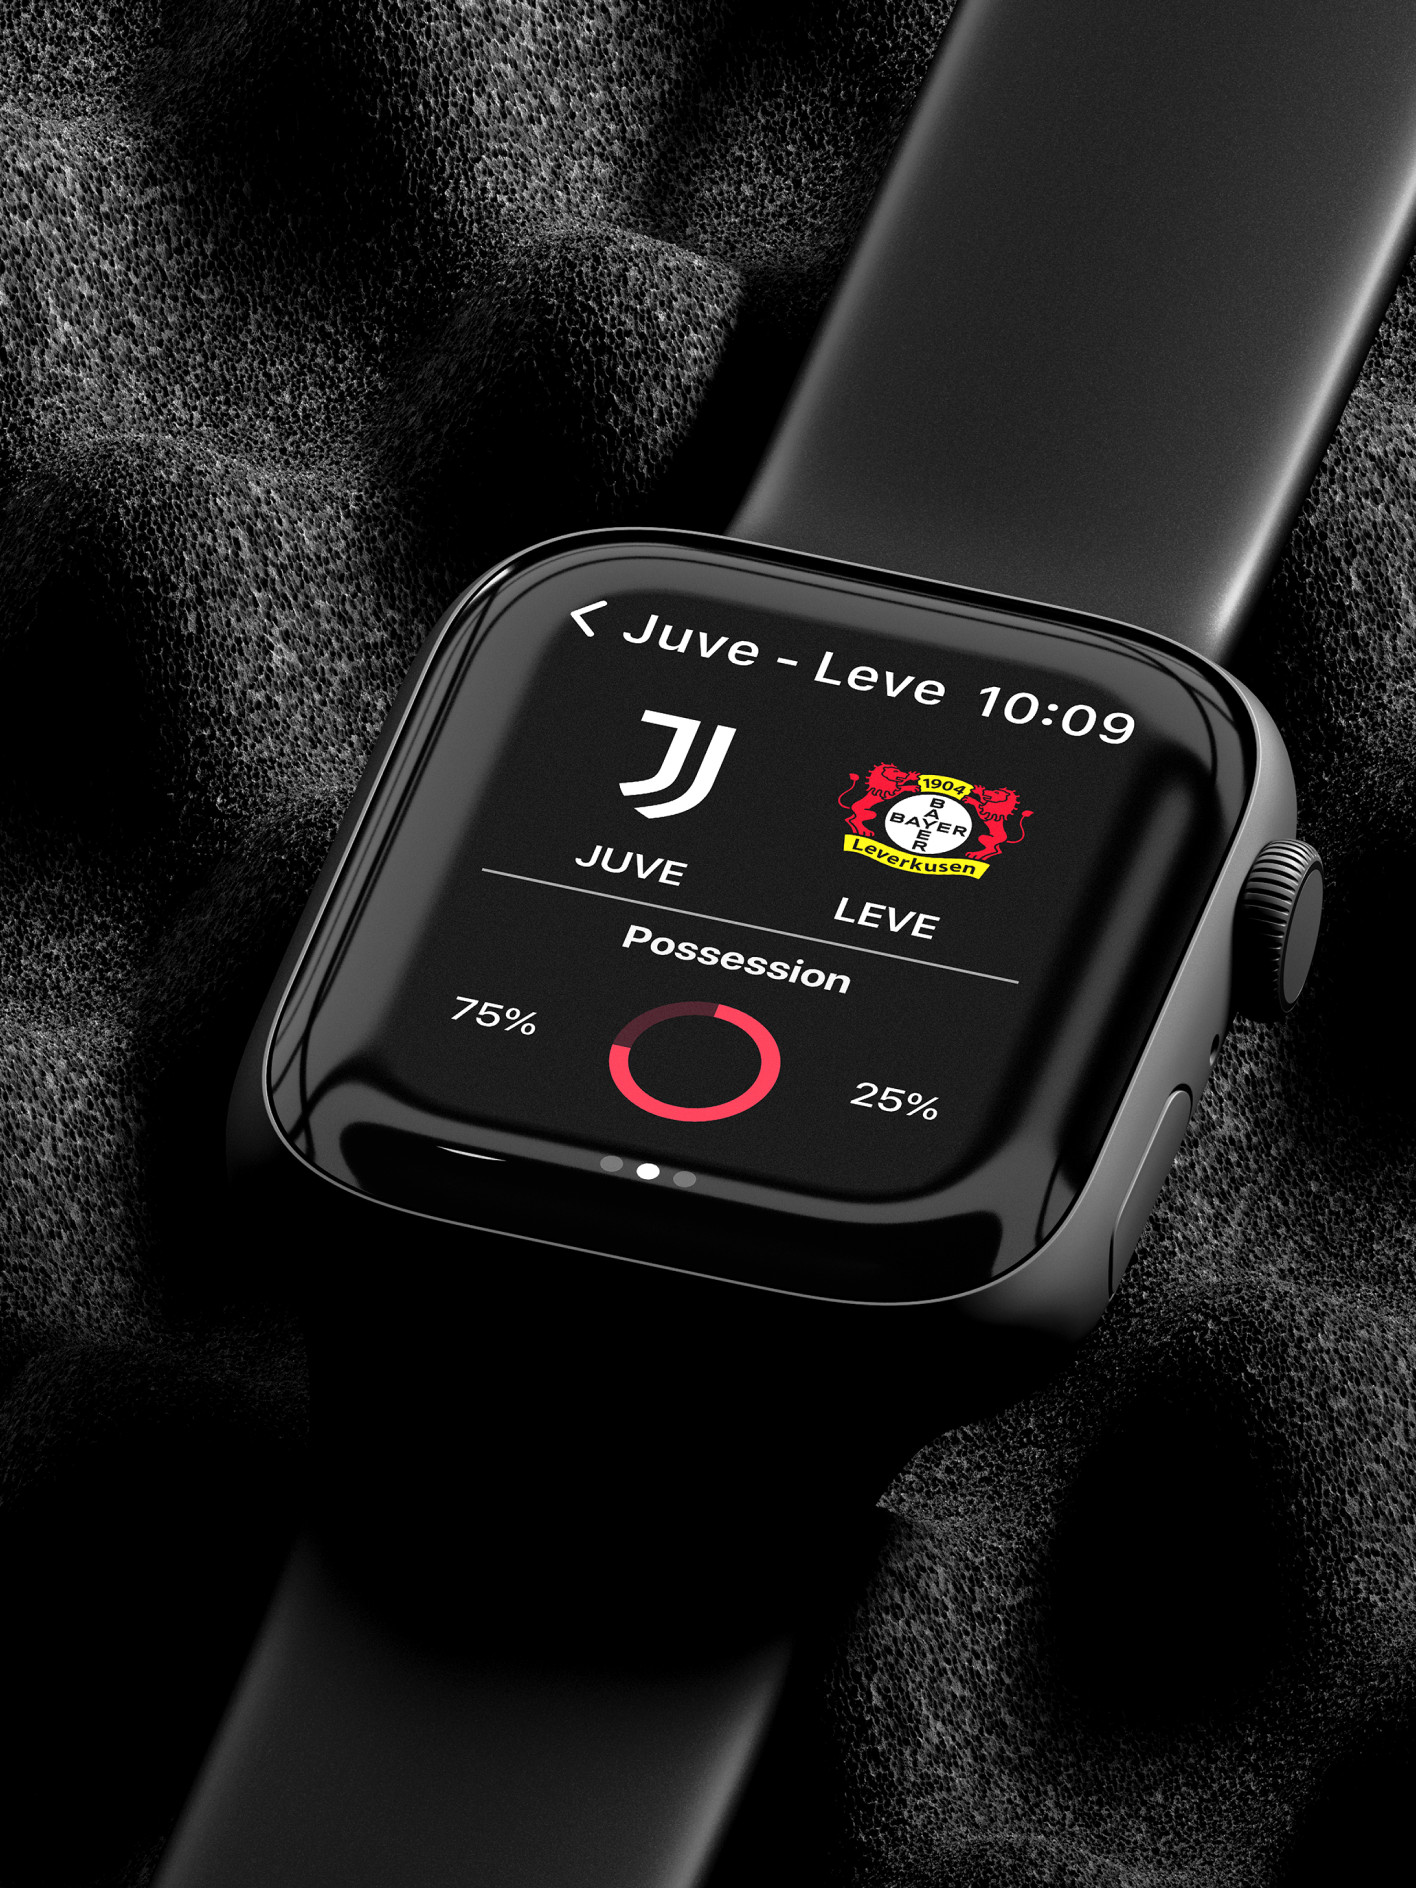 The mobile interface adapts to the smartwatch view, in this case showing the teams involved in the current match and the percentages of ball possession